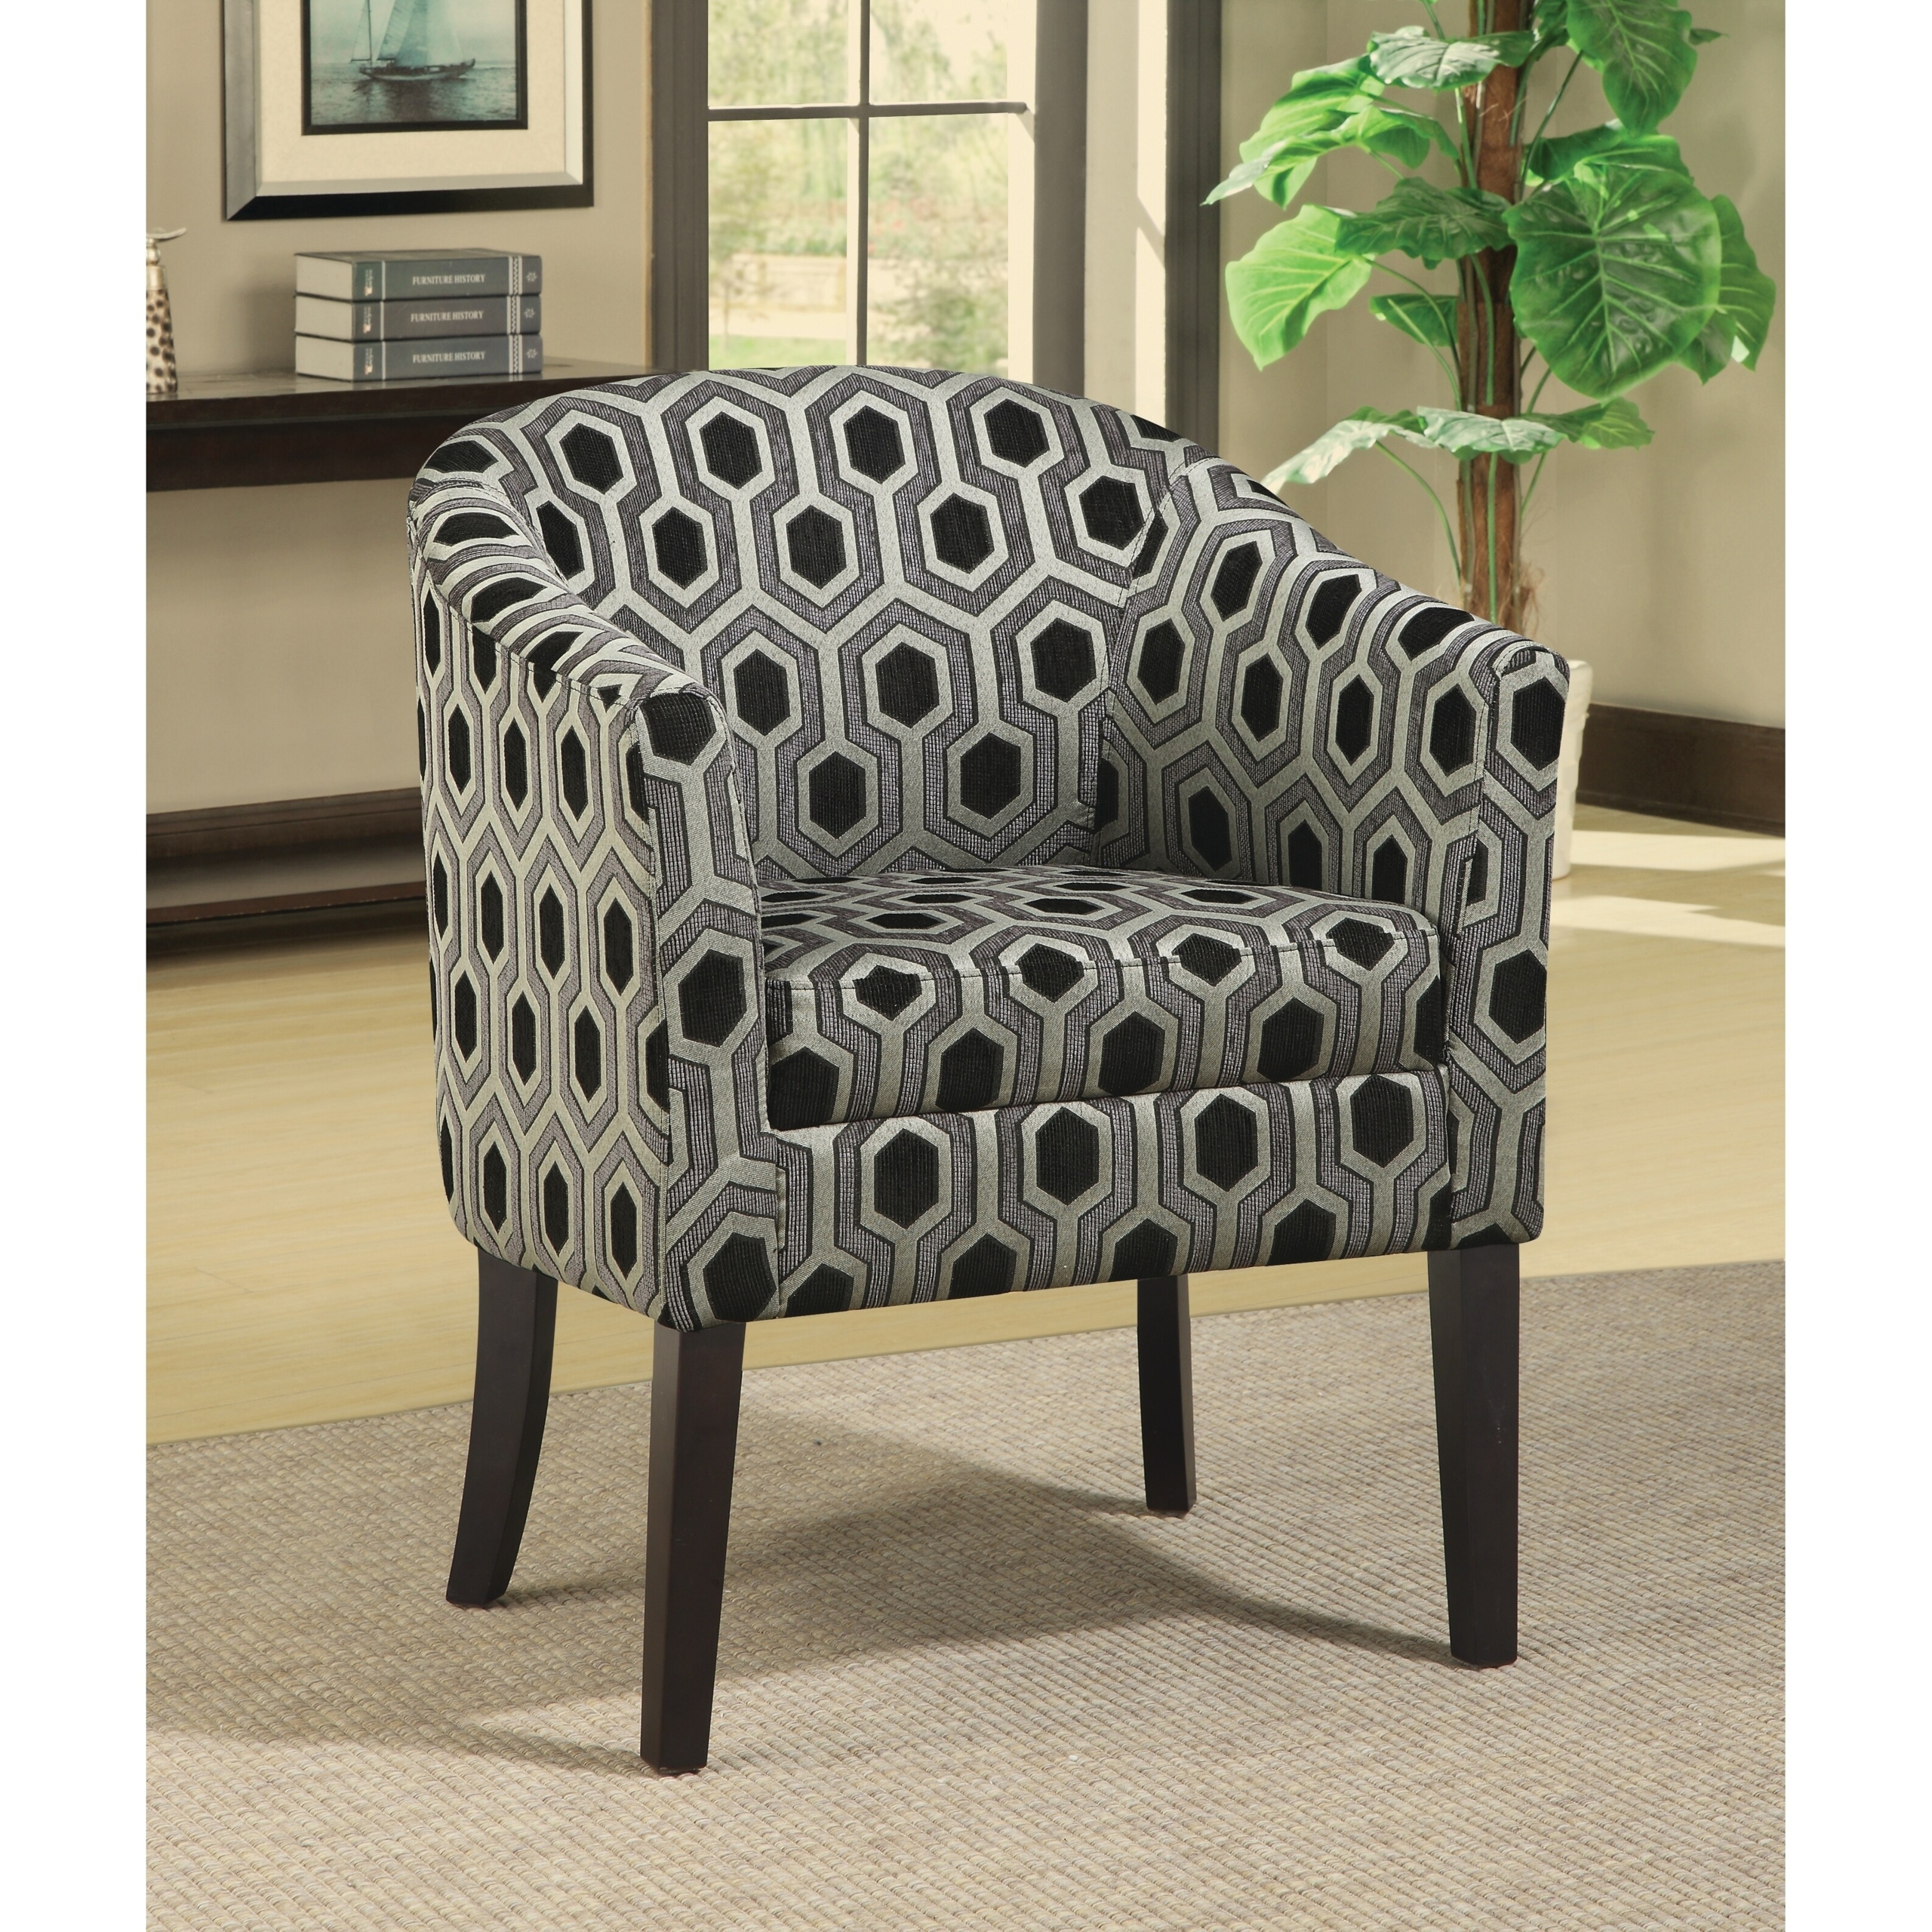 Grey and Black Patterned Accent Chair By Coaster Furniture